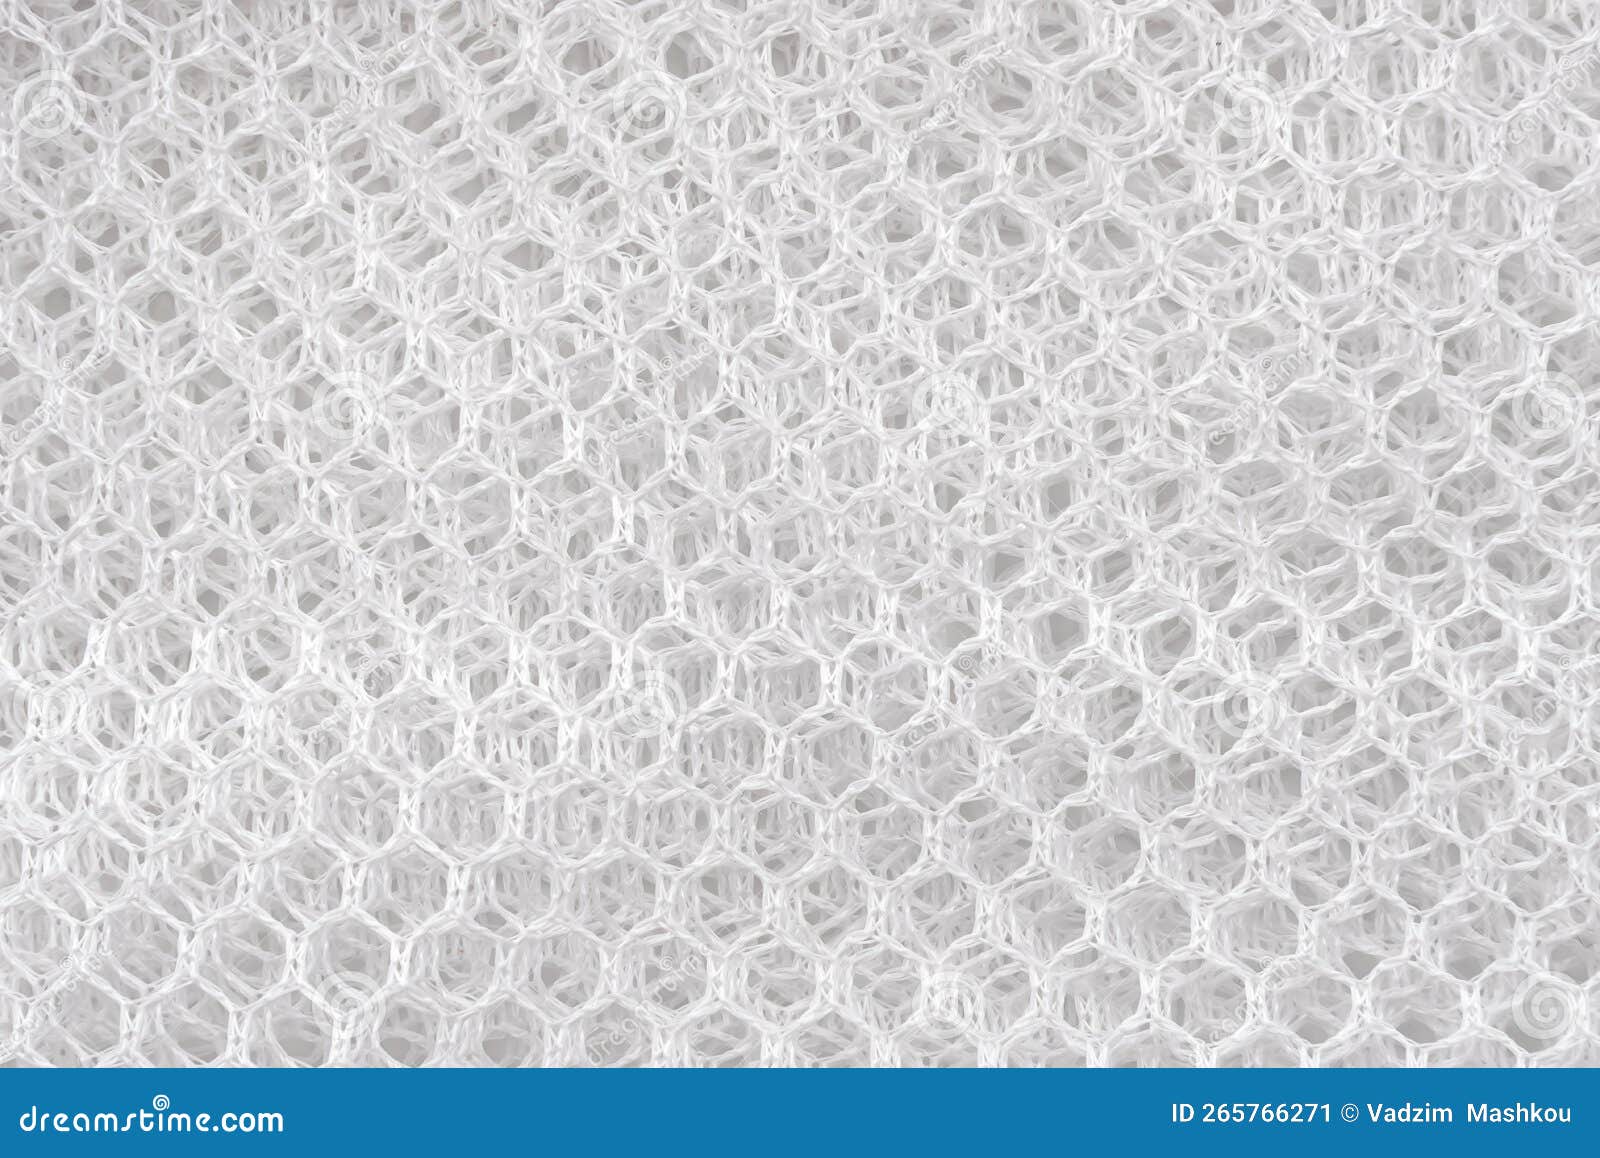 Texture or Background of Mesh Fabric in White. Mesh Material Stock